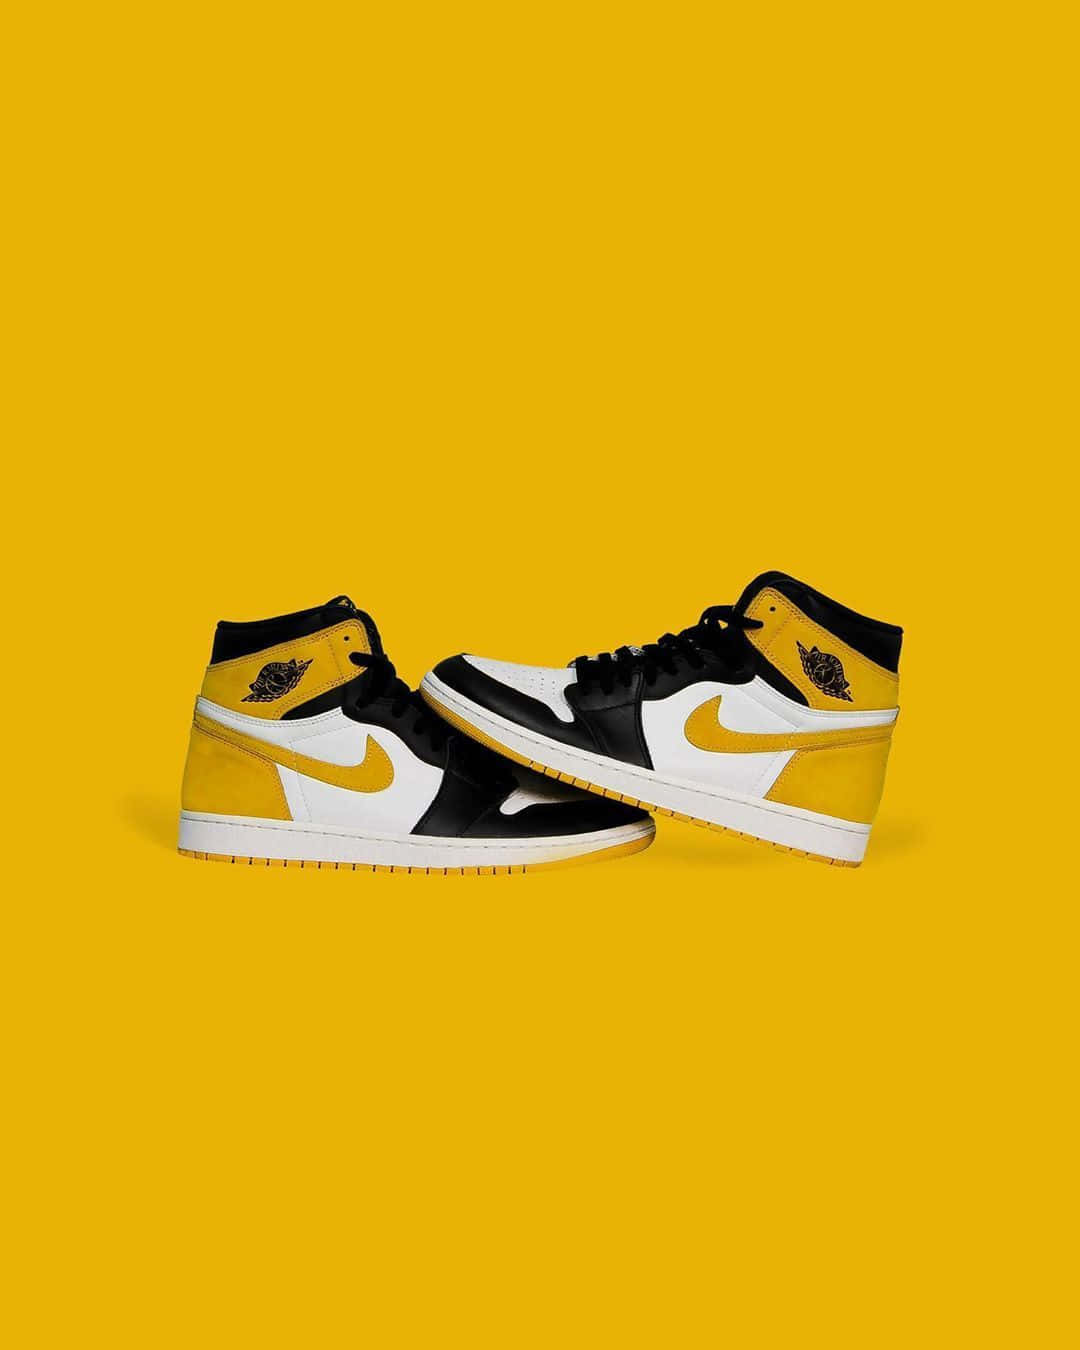 Fresh out of the box, the iconic yellow and black Jordan. Wallpaper